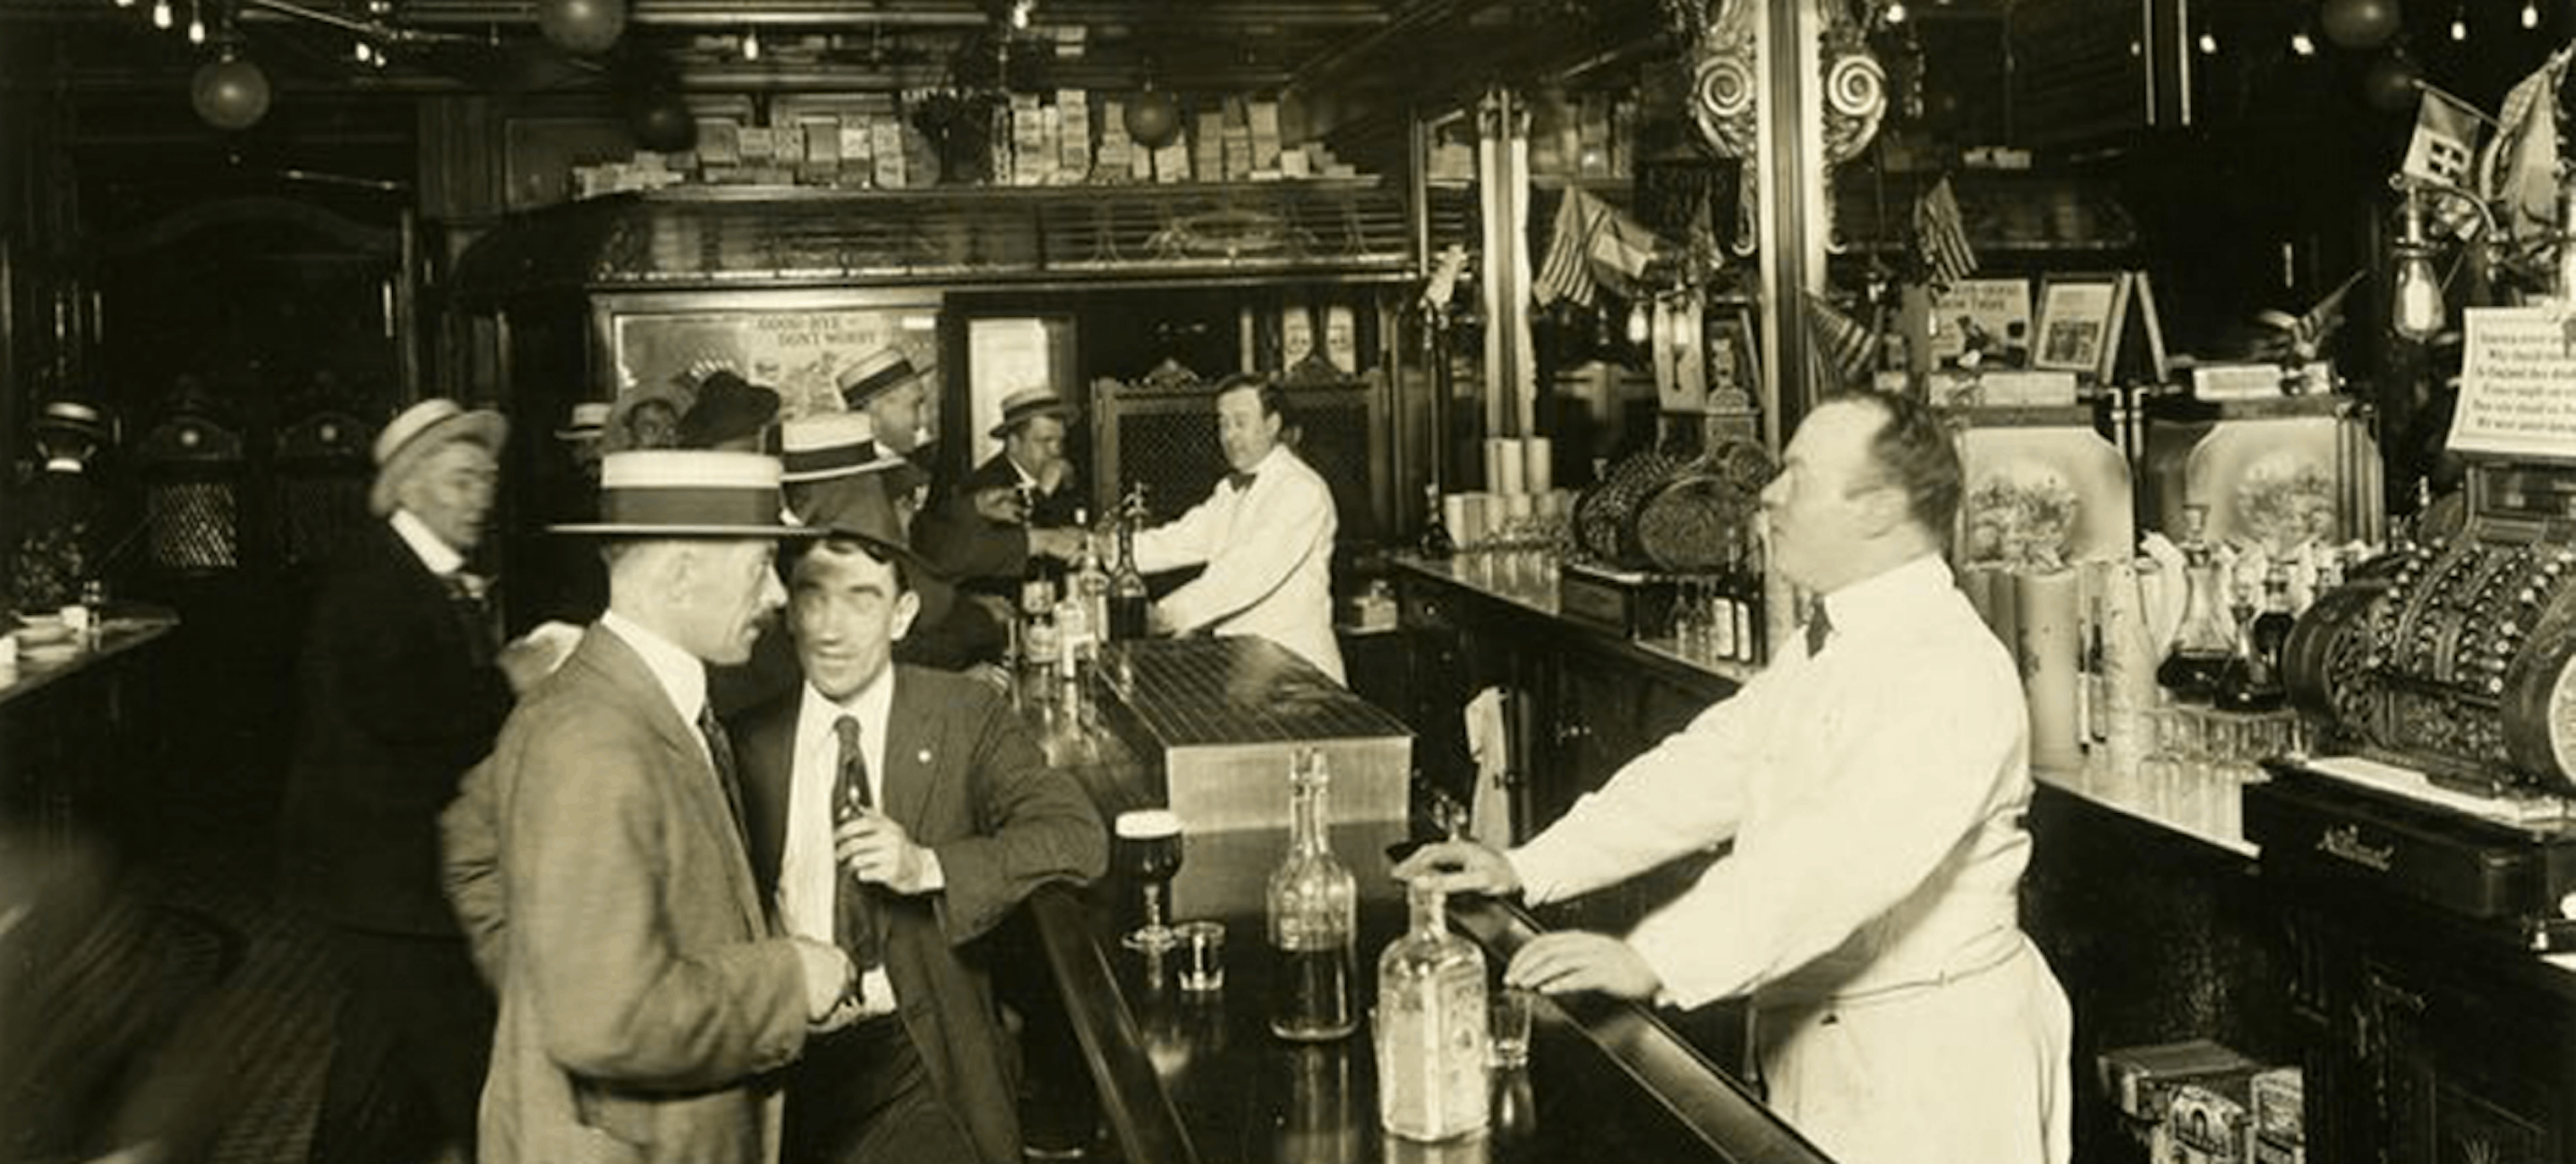 An undated photograph from the Patricia D. Klingenstein Library's collection of the late 19th-century Bowery bar run by Steve Brodie, a man who earned fame for allegedly jumping off of the Brooklyn Bridge as a stunt and surviving the fall. 
